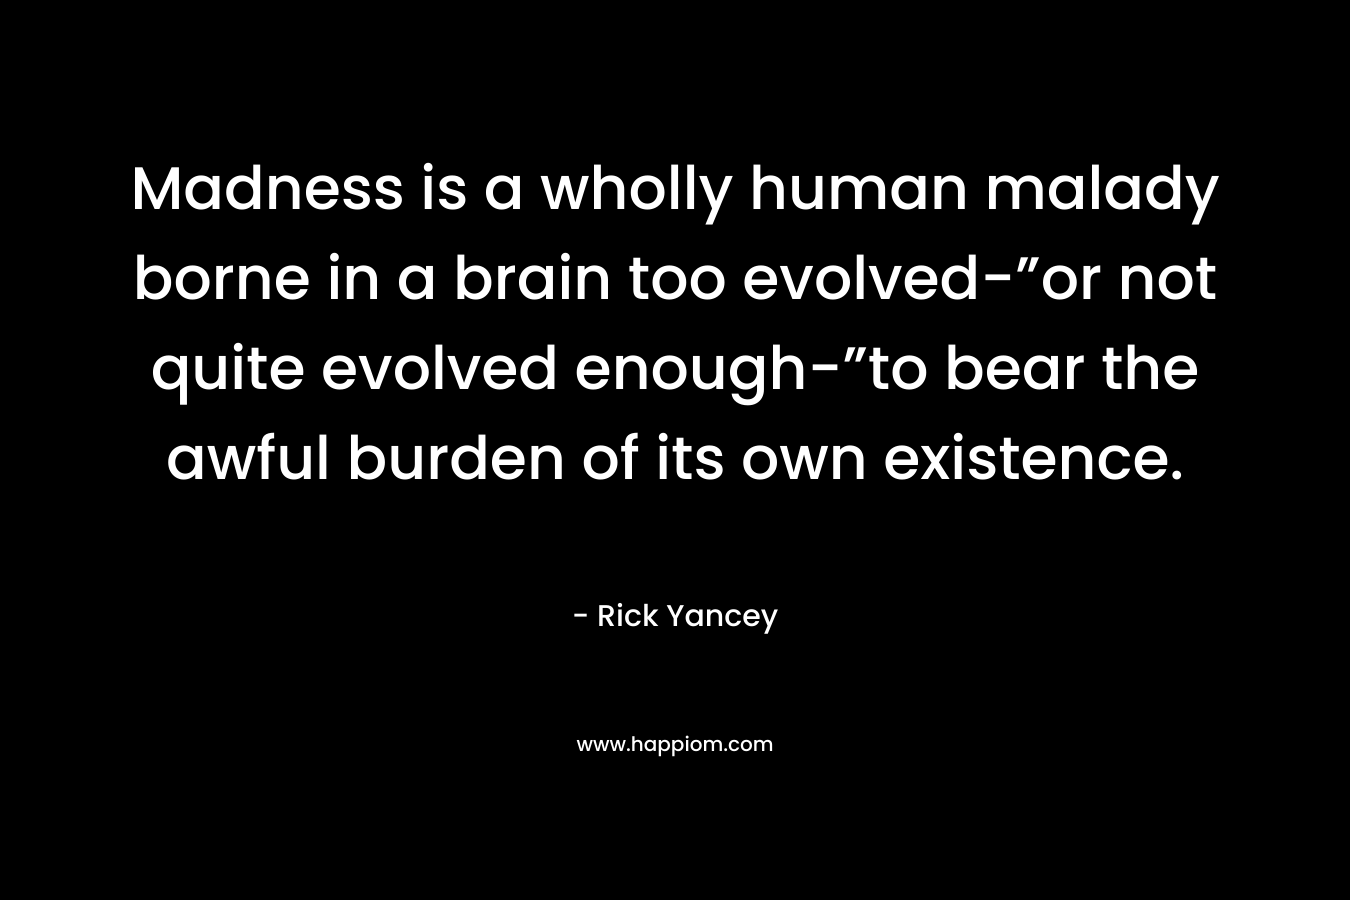 Madness is a wholly human malady borne in a brain too evolved-”or not quite evolved enough-”to bear the awful burden of its own existence. – Rick Yancey